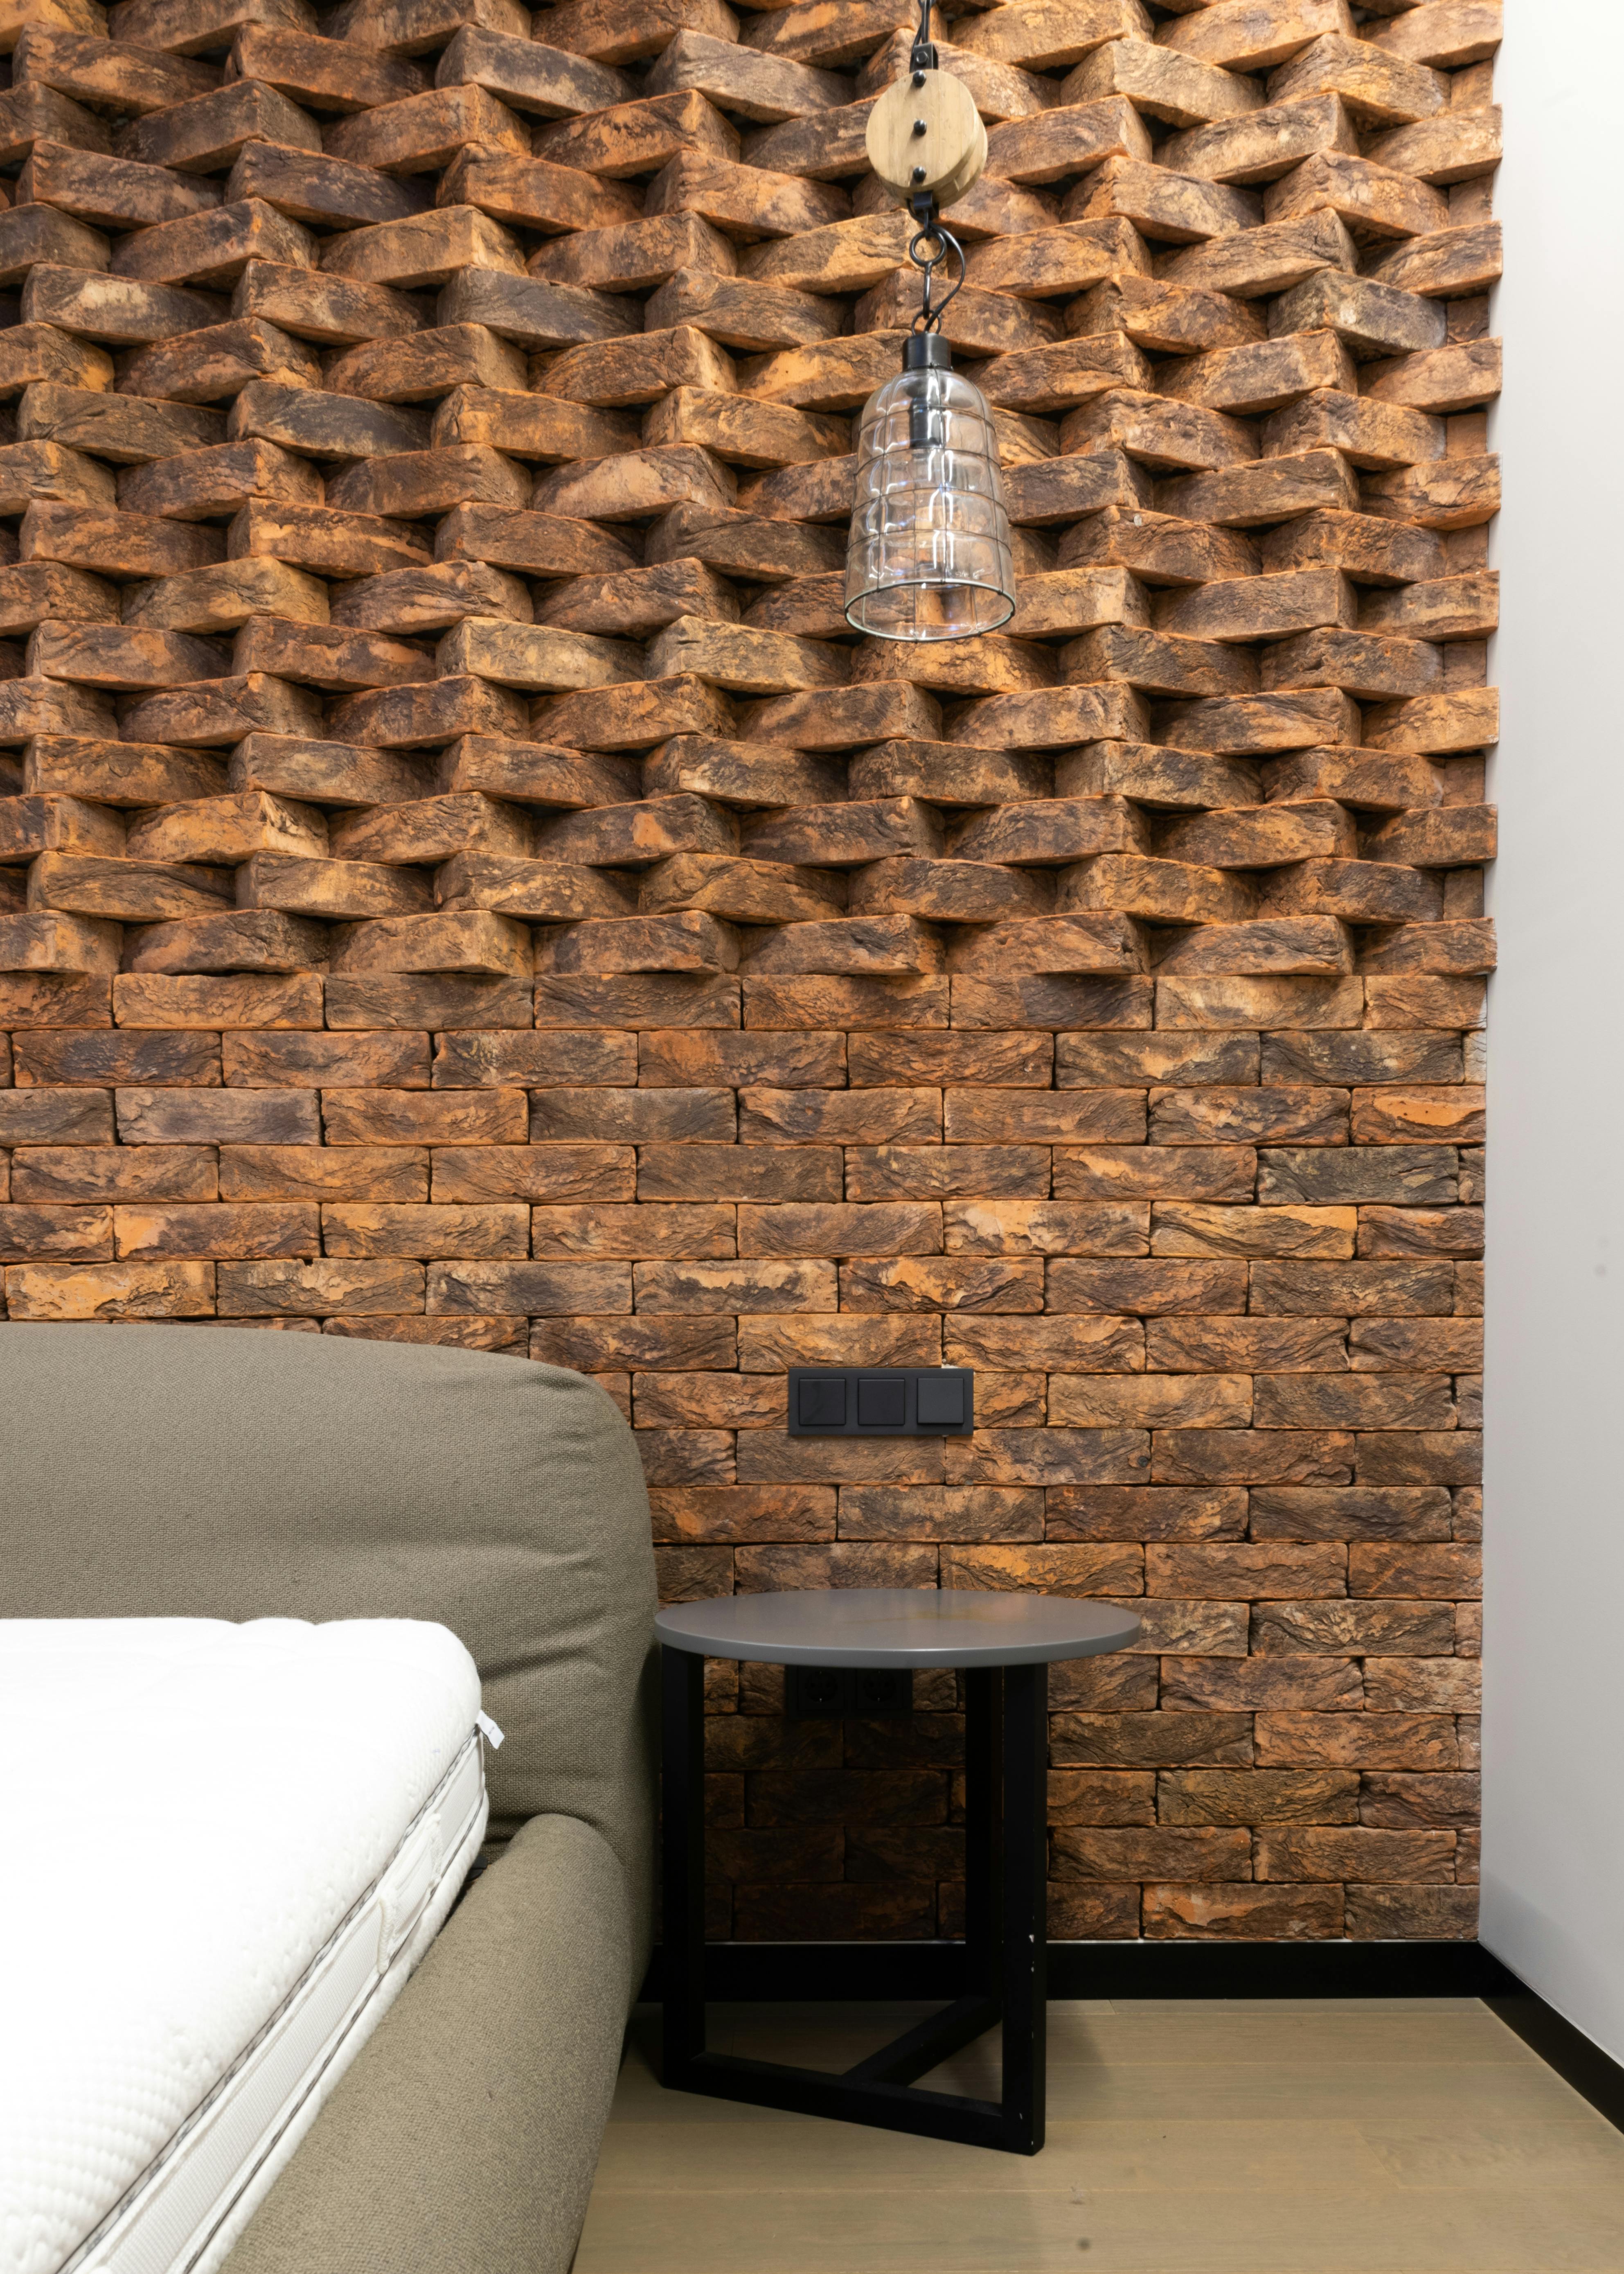 interior details of modern loft style bedroom with creative brick wall